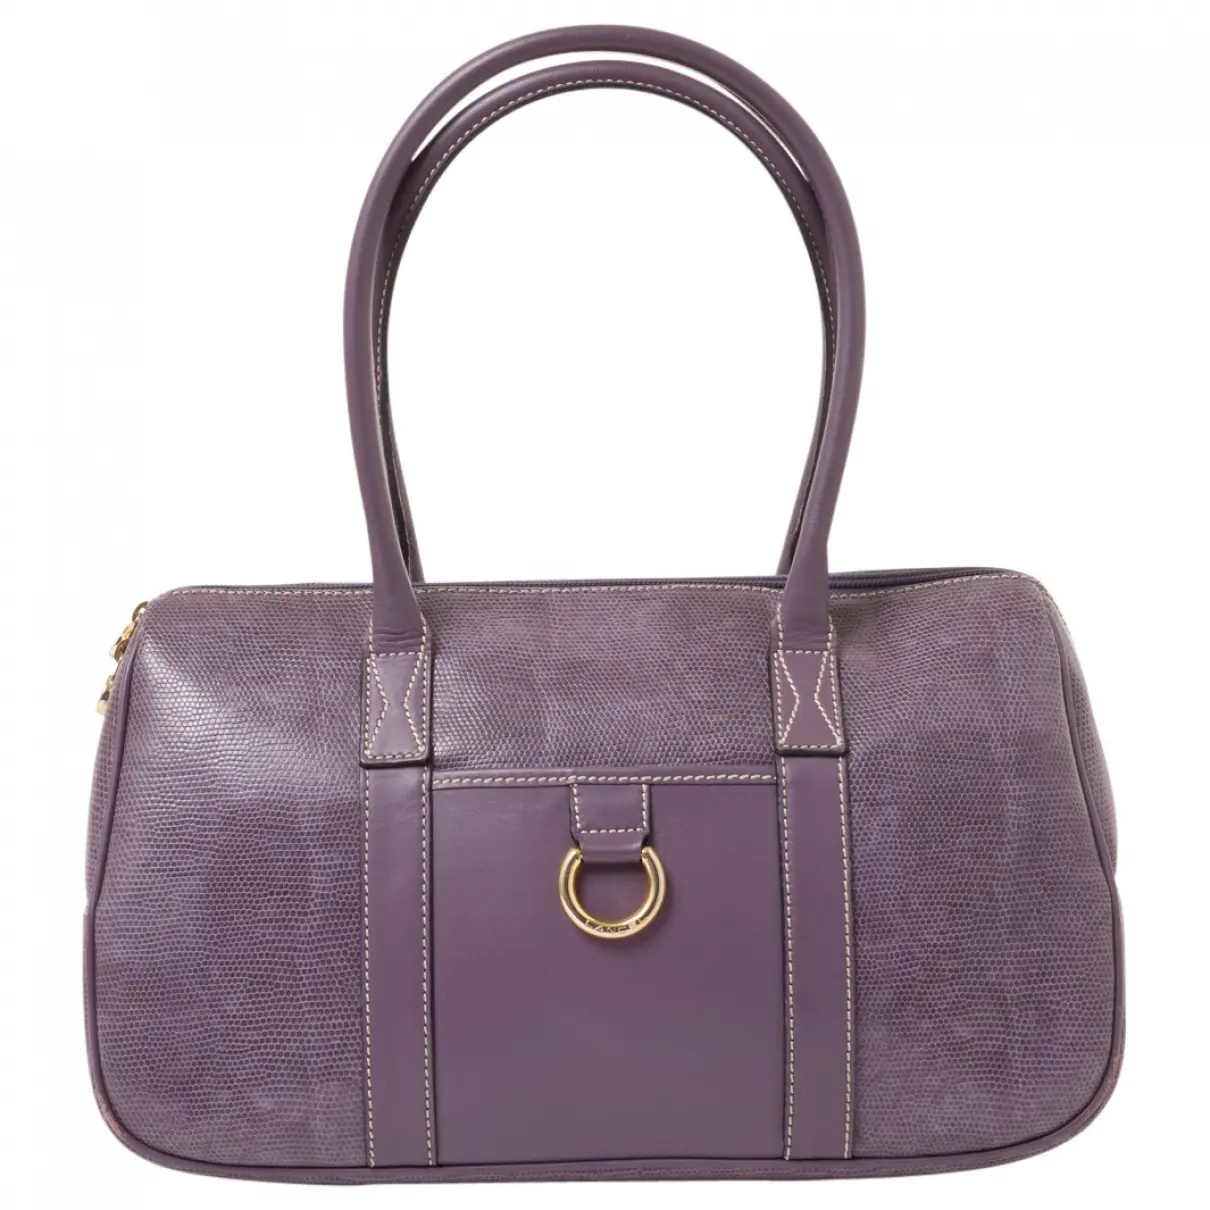 LEATHER BOWLING BAG IN DOVE-COLOURED SNAKESKIN-STYLE LEATHER Lancel